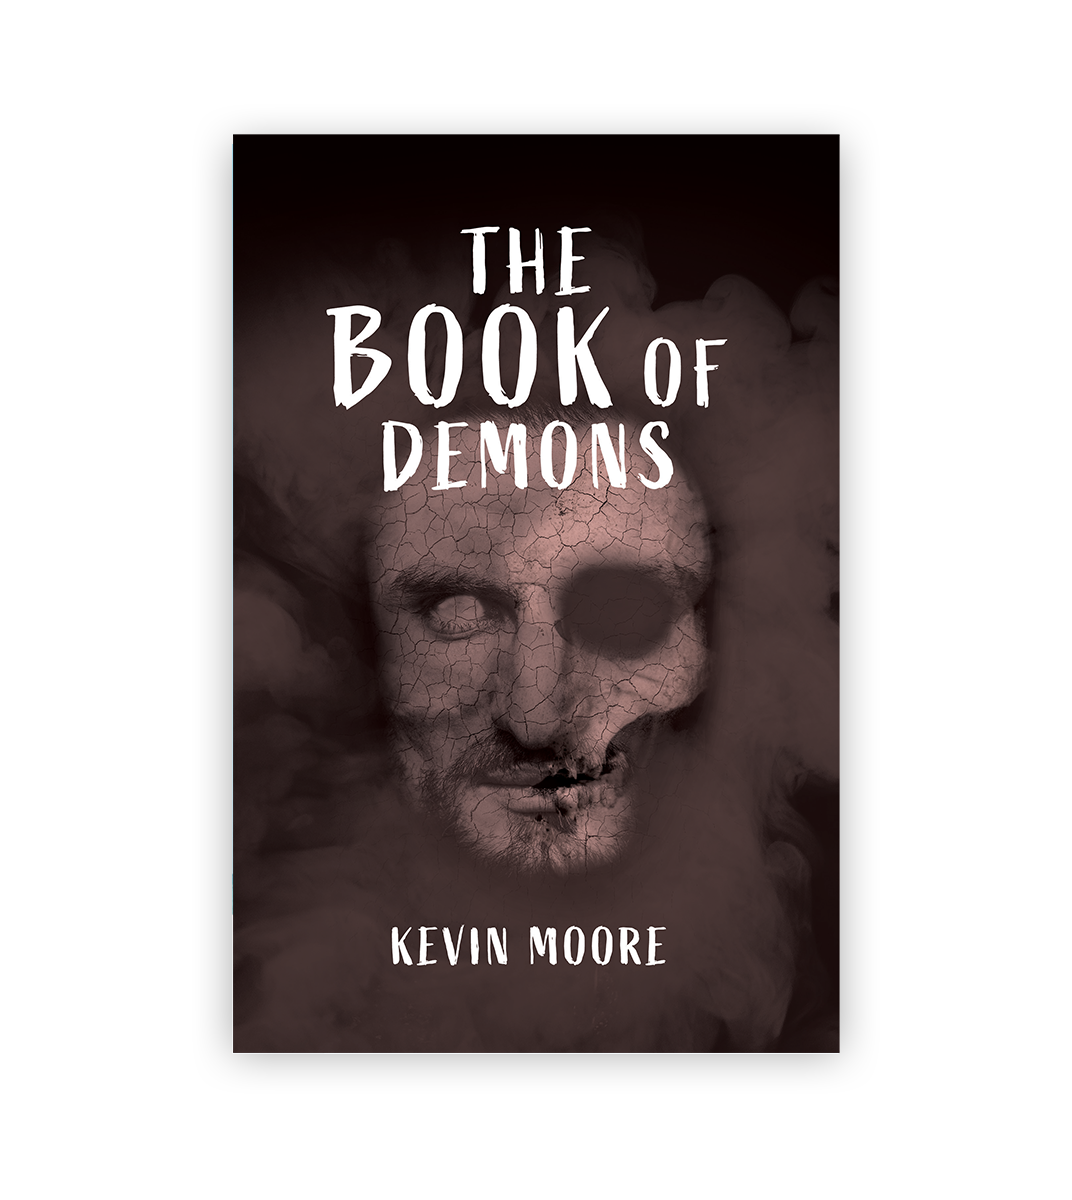 BookofDemons_CoverMocks_Social.png